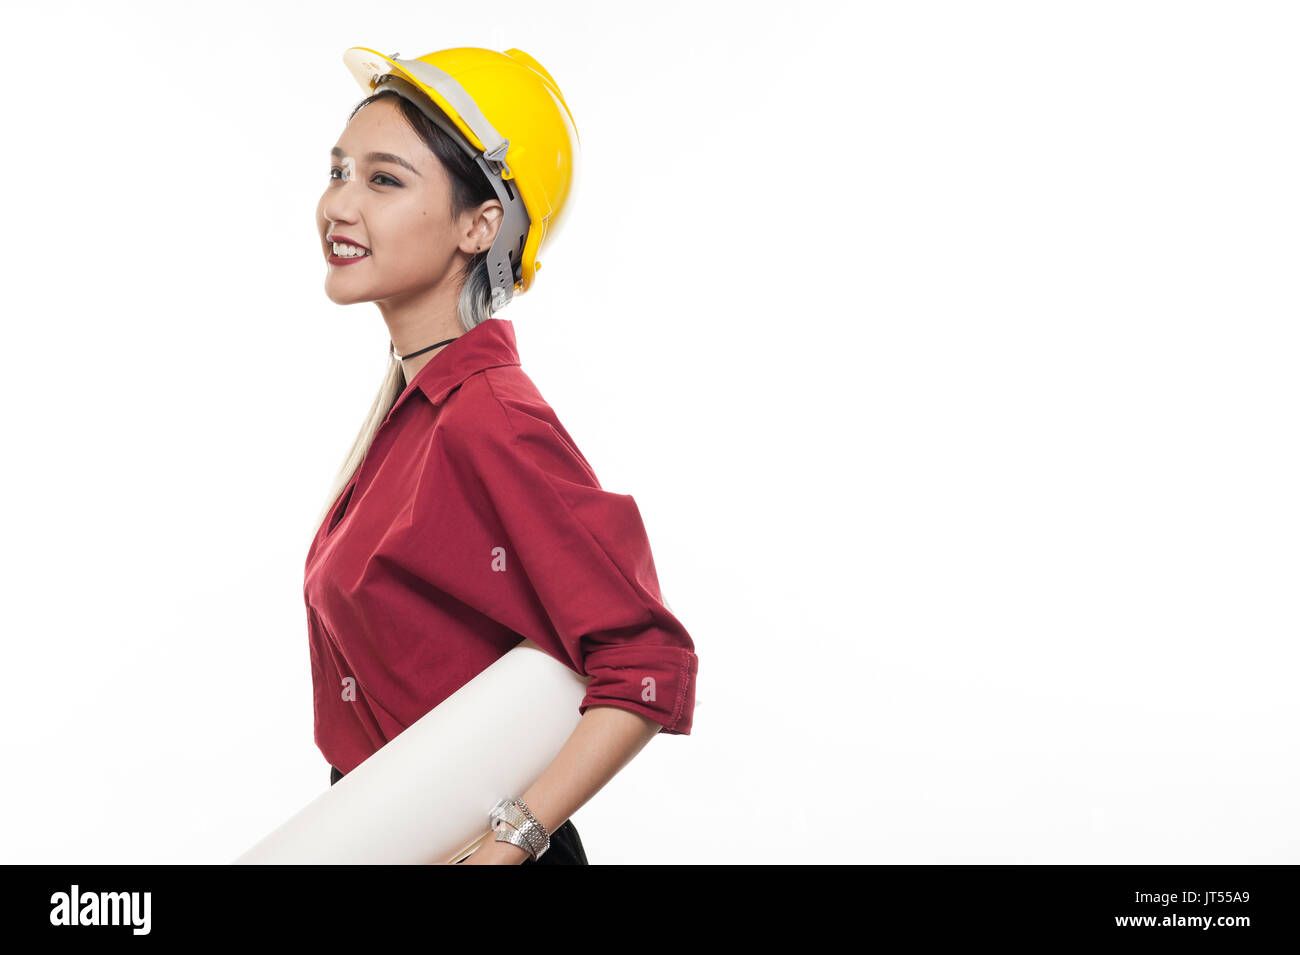 Young Asian woman architect with red shirt and yellow safety helmet smiling while carrying blueprint papers. Industrial occupation people concept Stock Photo